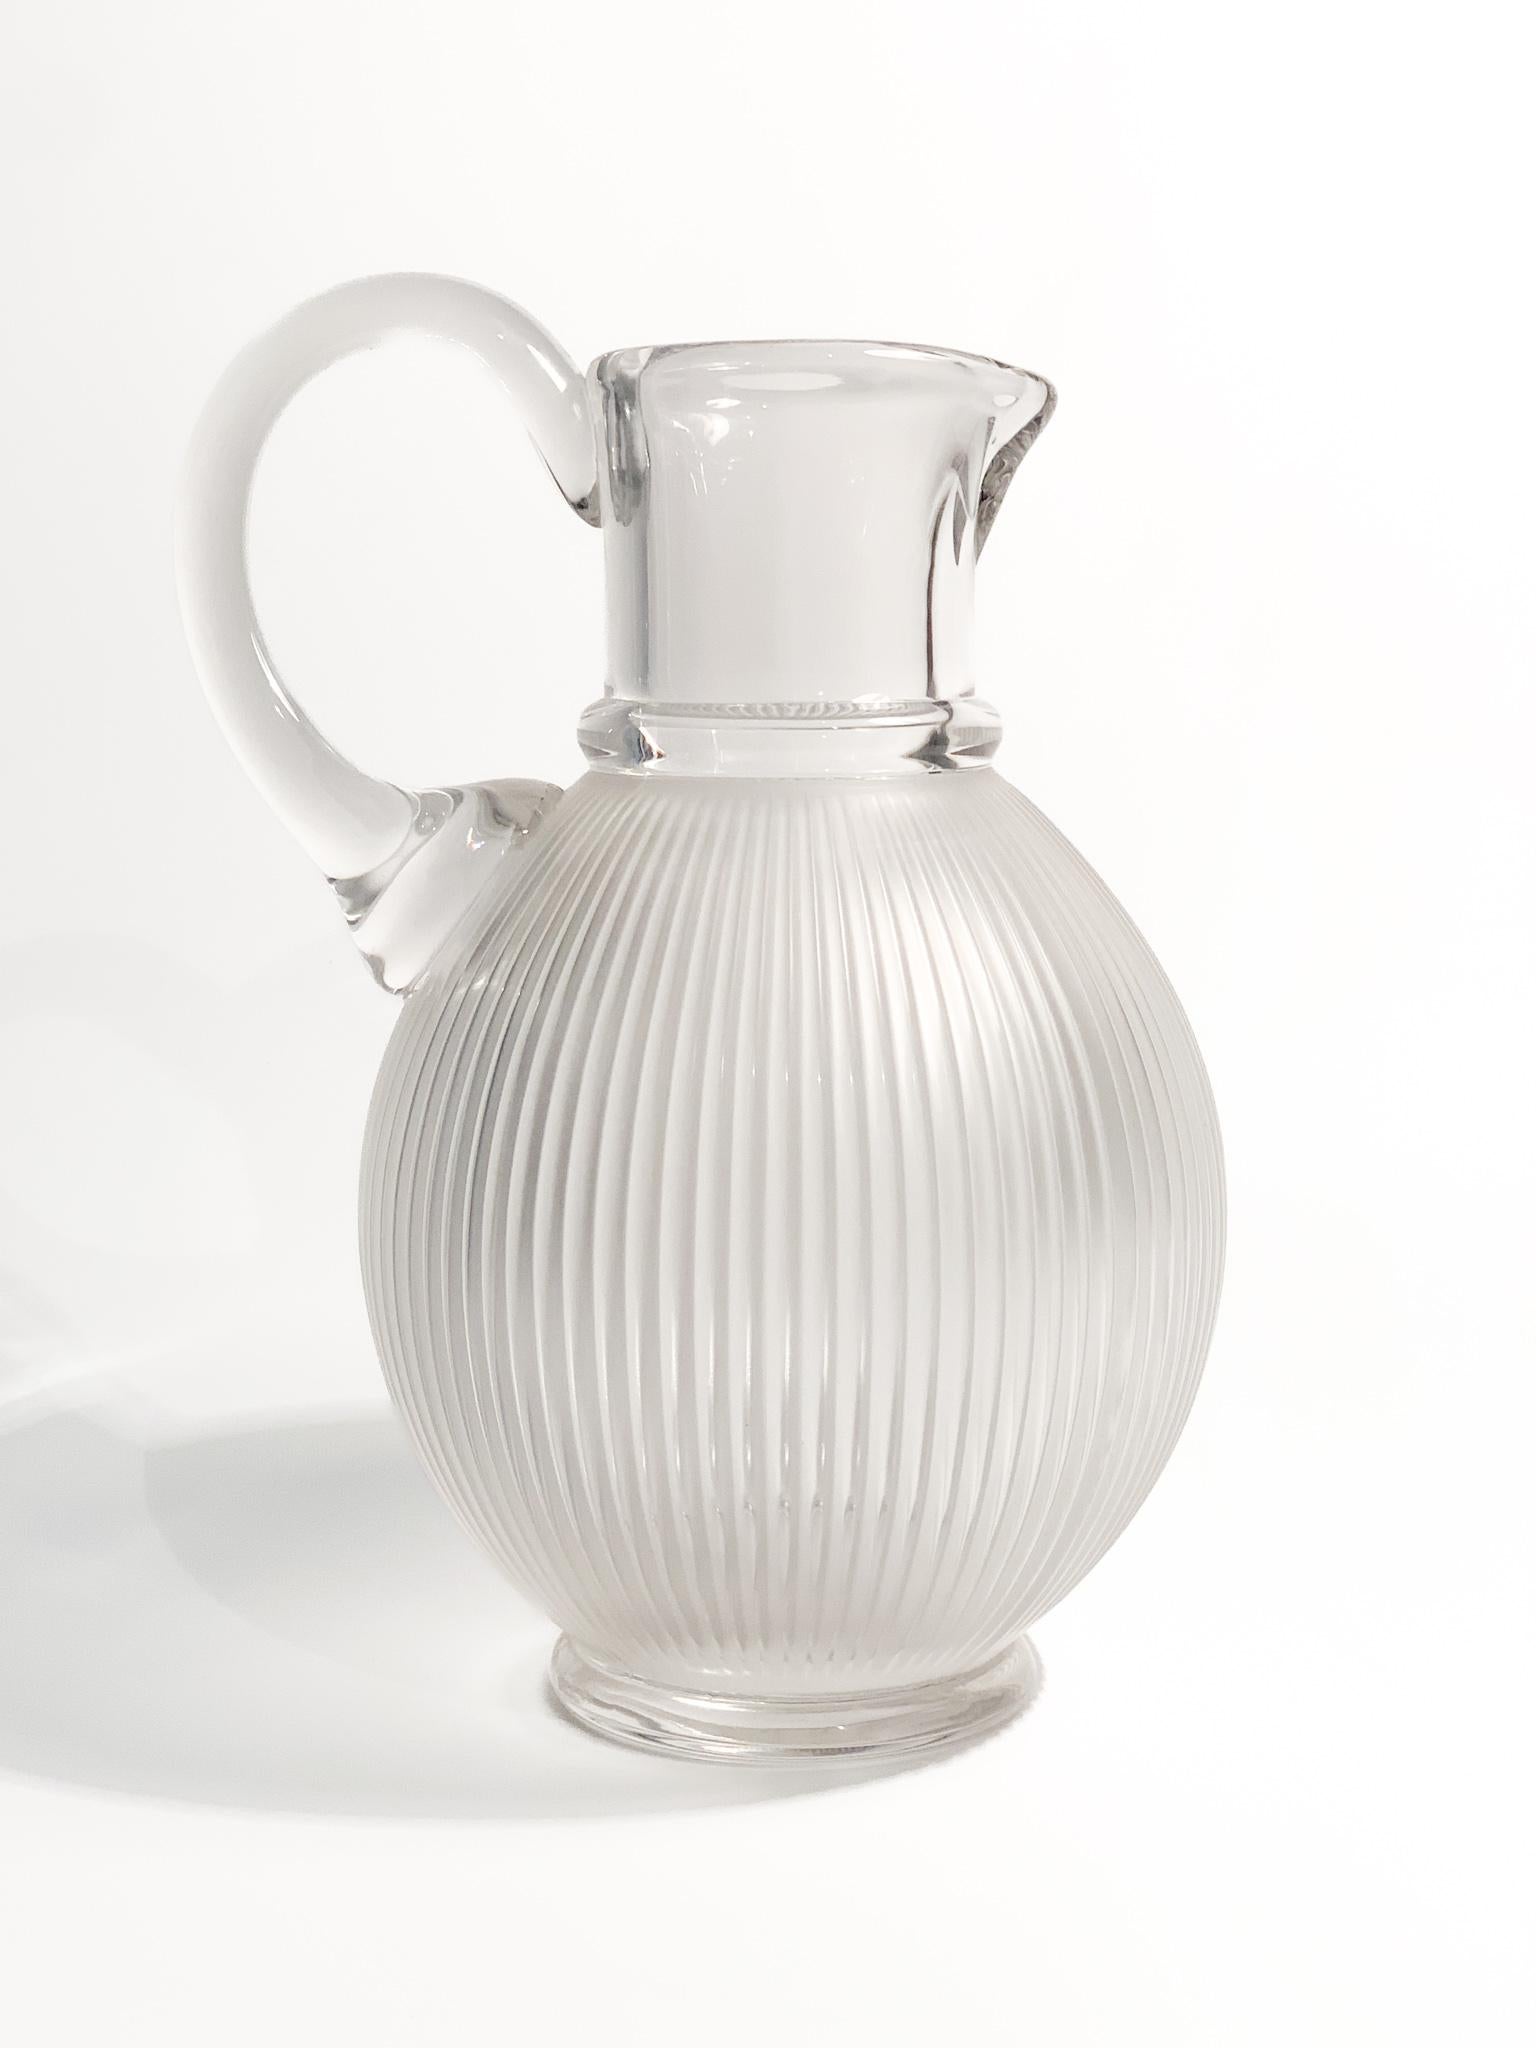 Lalique Langeais Crystal Pitcher / Carafe.

Ø 16 cm h 22 cm

The Langeais collection was designed by Renè's son Marc Lalique in 1976, and has become an iconic model. The lines, inspired by ancient columns and the most modern architecture, are